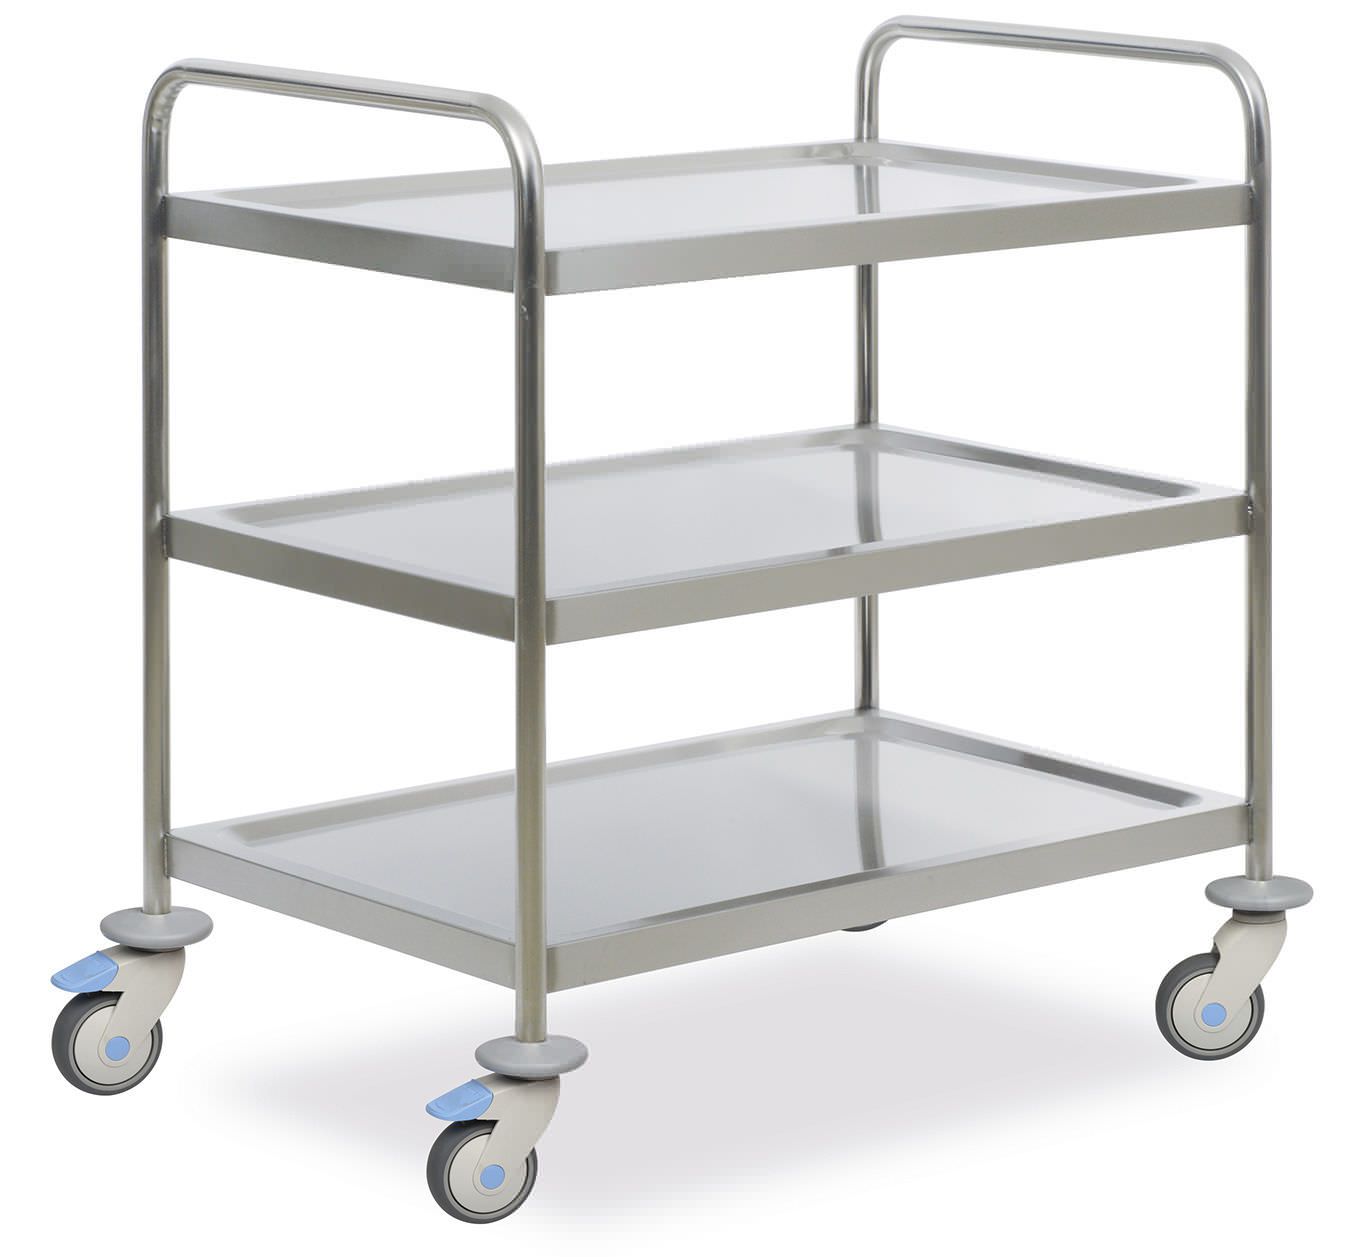 Instrument trolley / 3-tray MTA 2119 MIXTA STAINLESS STEEL HOSPITAL EQUIPMENTS